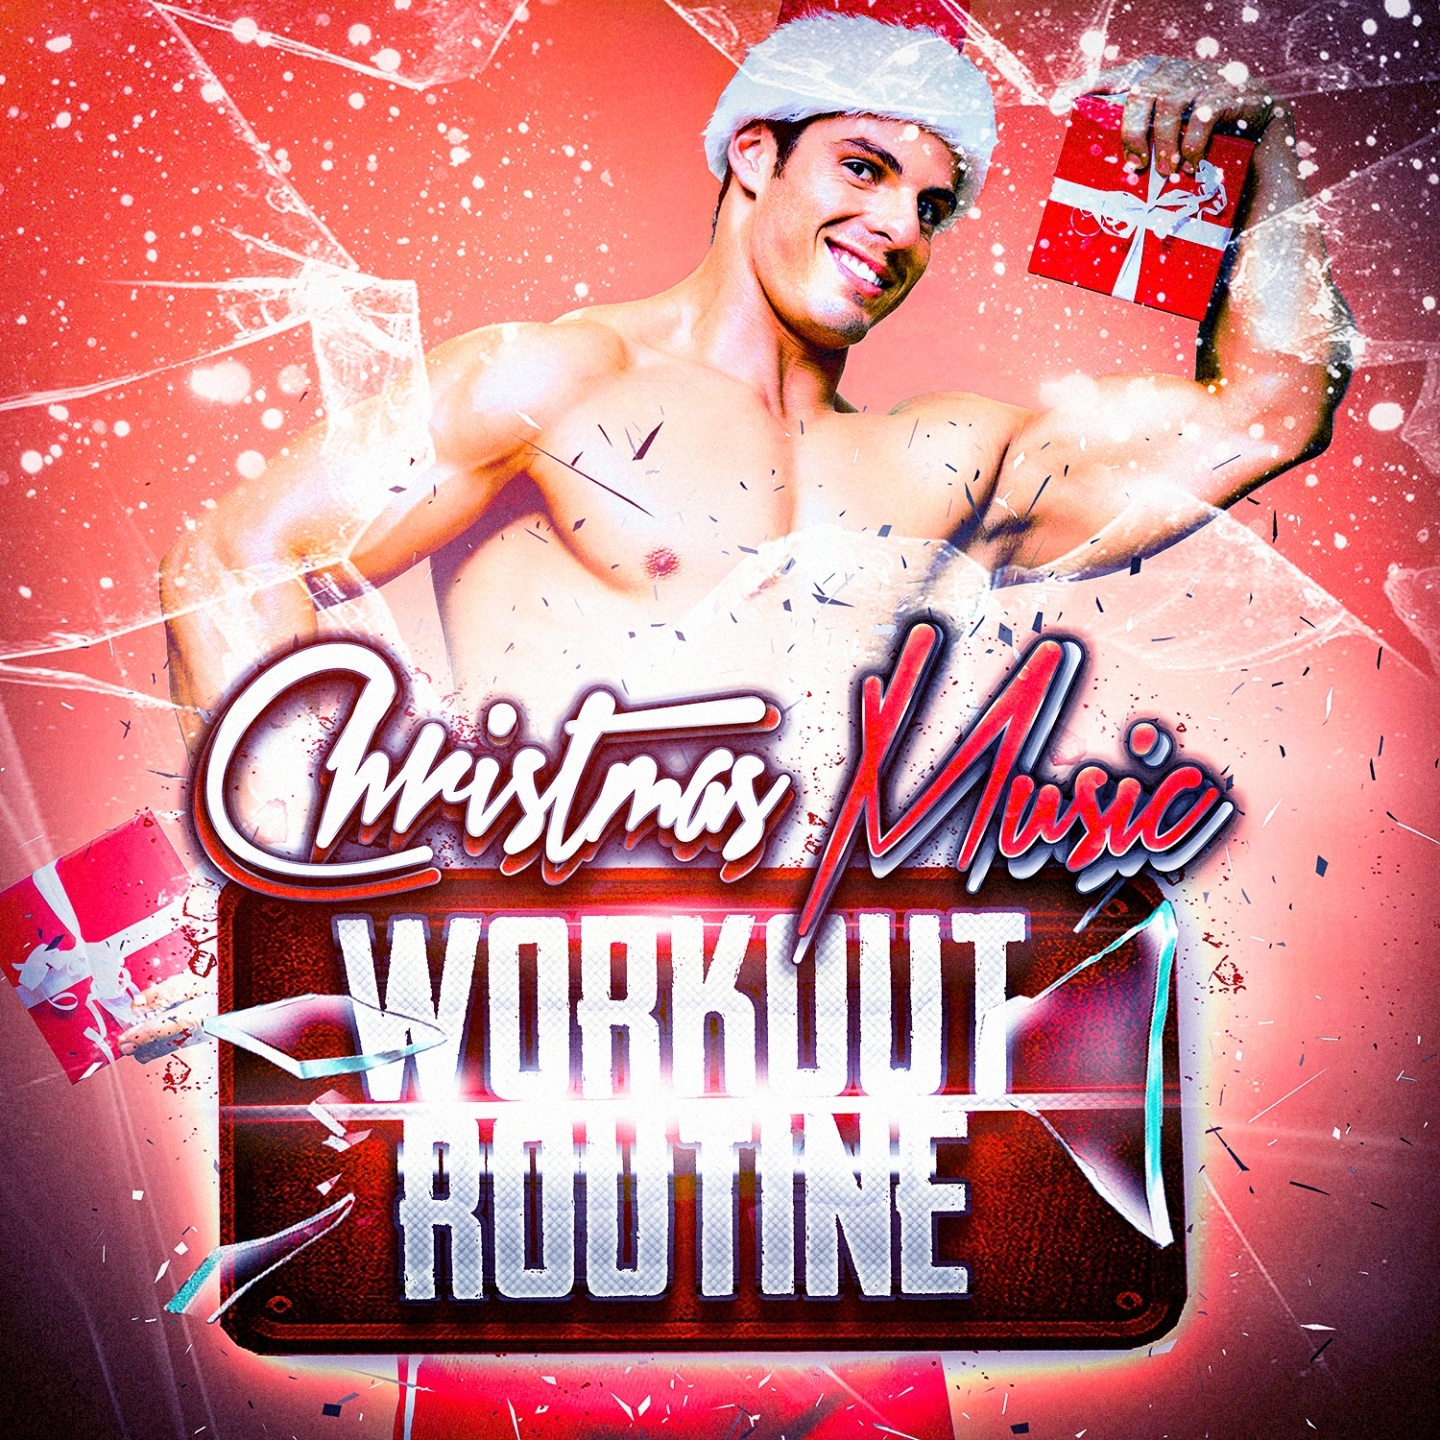 Christmas Music Workout Routine